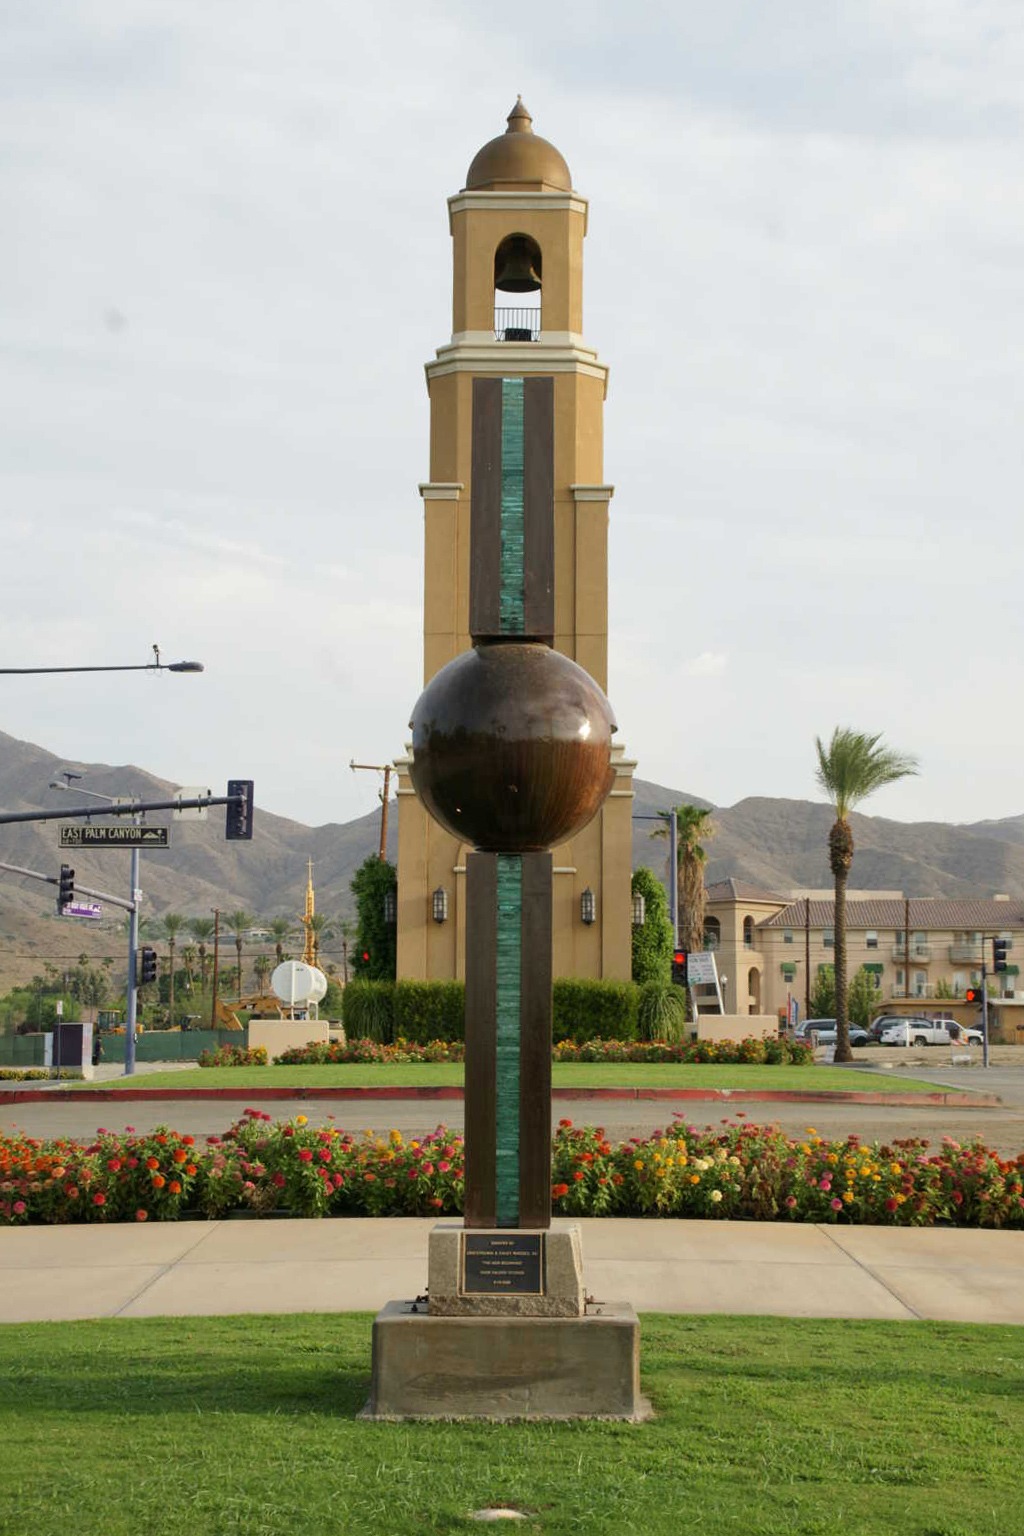 Bell tower and public art inline